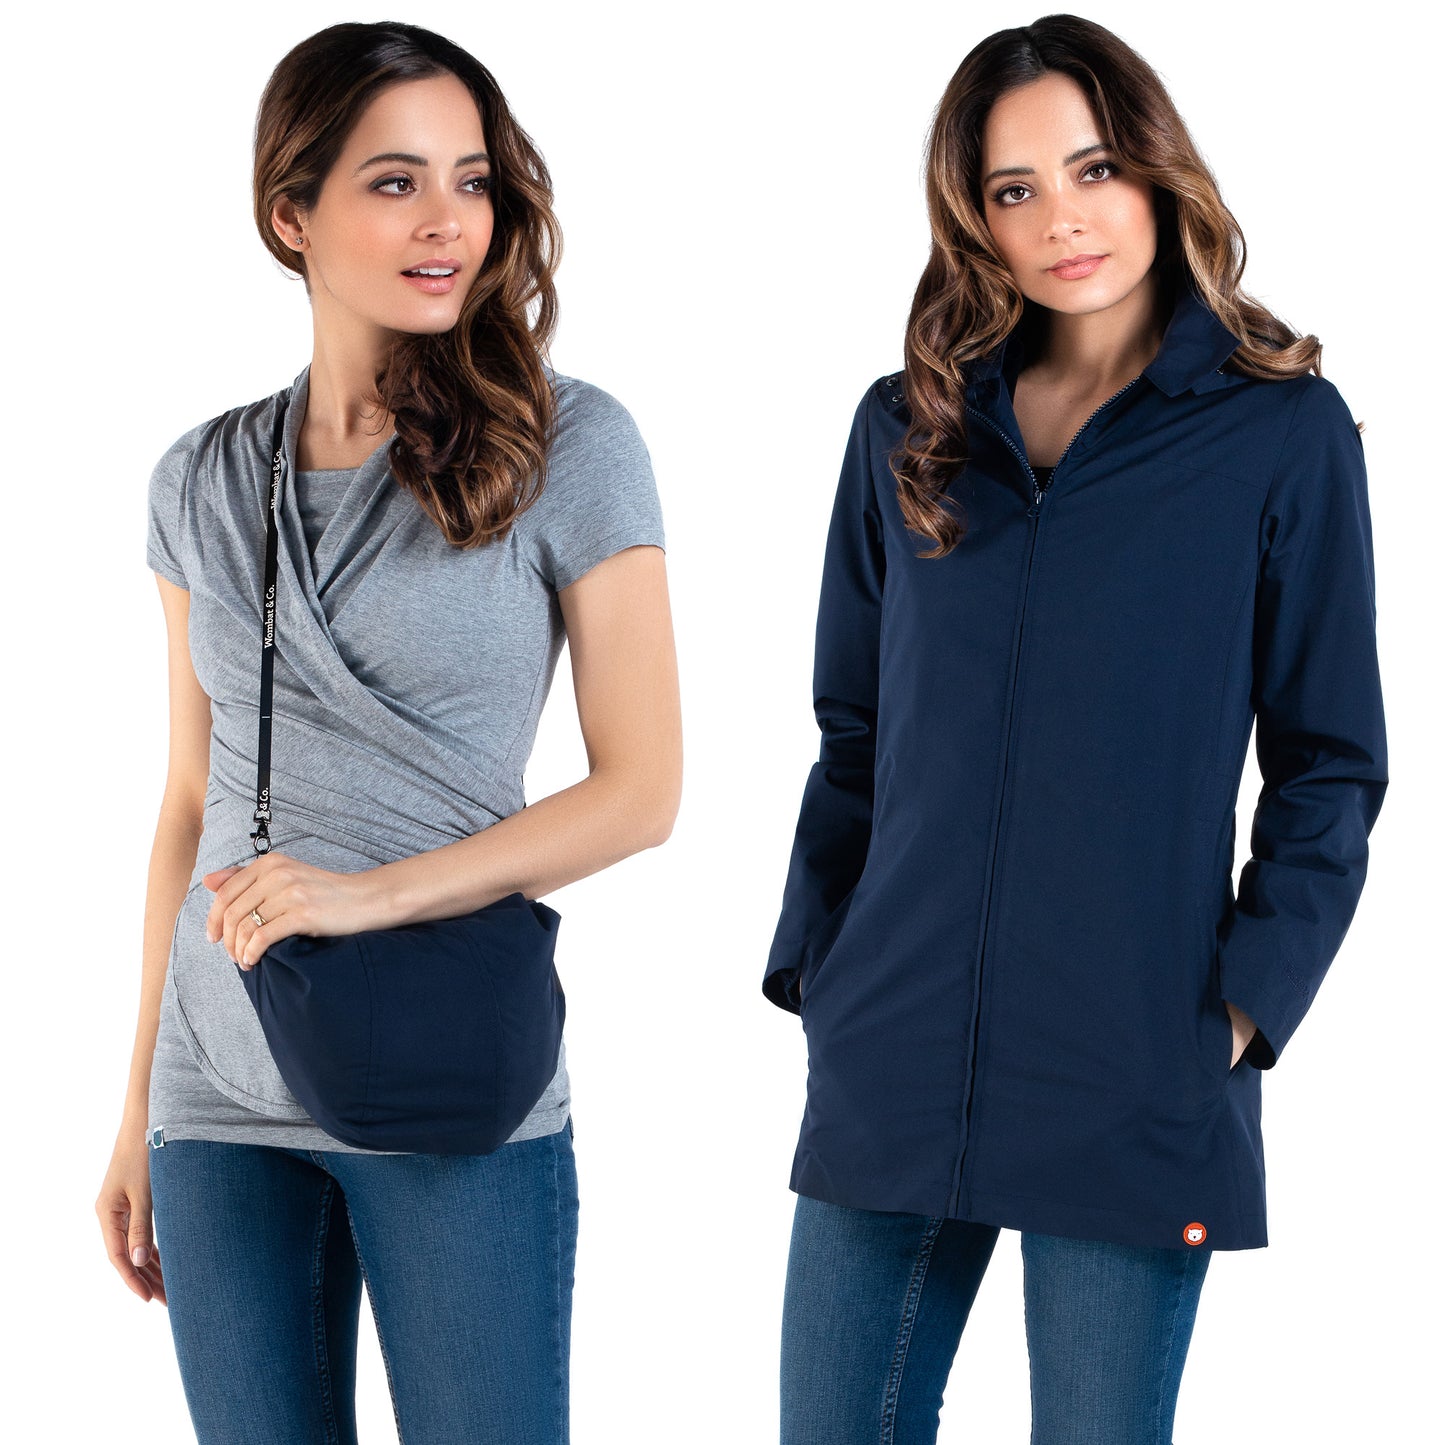 NUMBAT GO - pregnancy and baby wearing jacket - navy blue